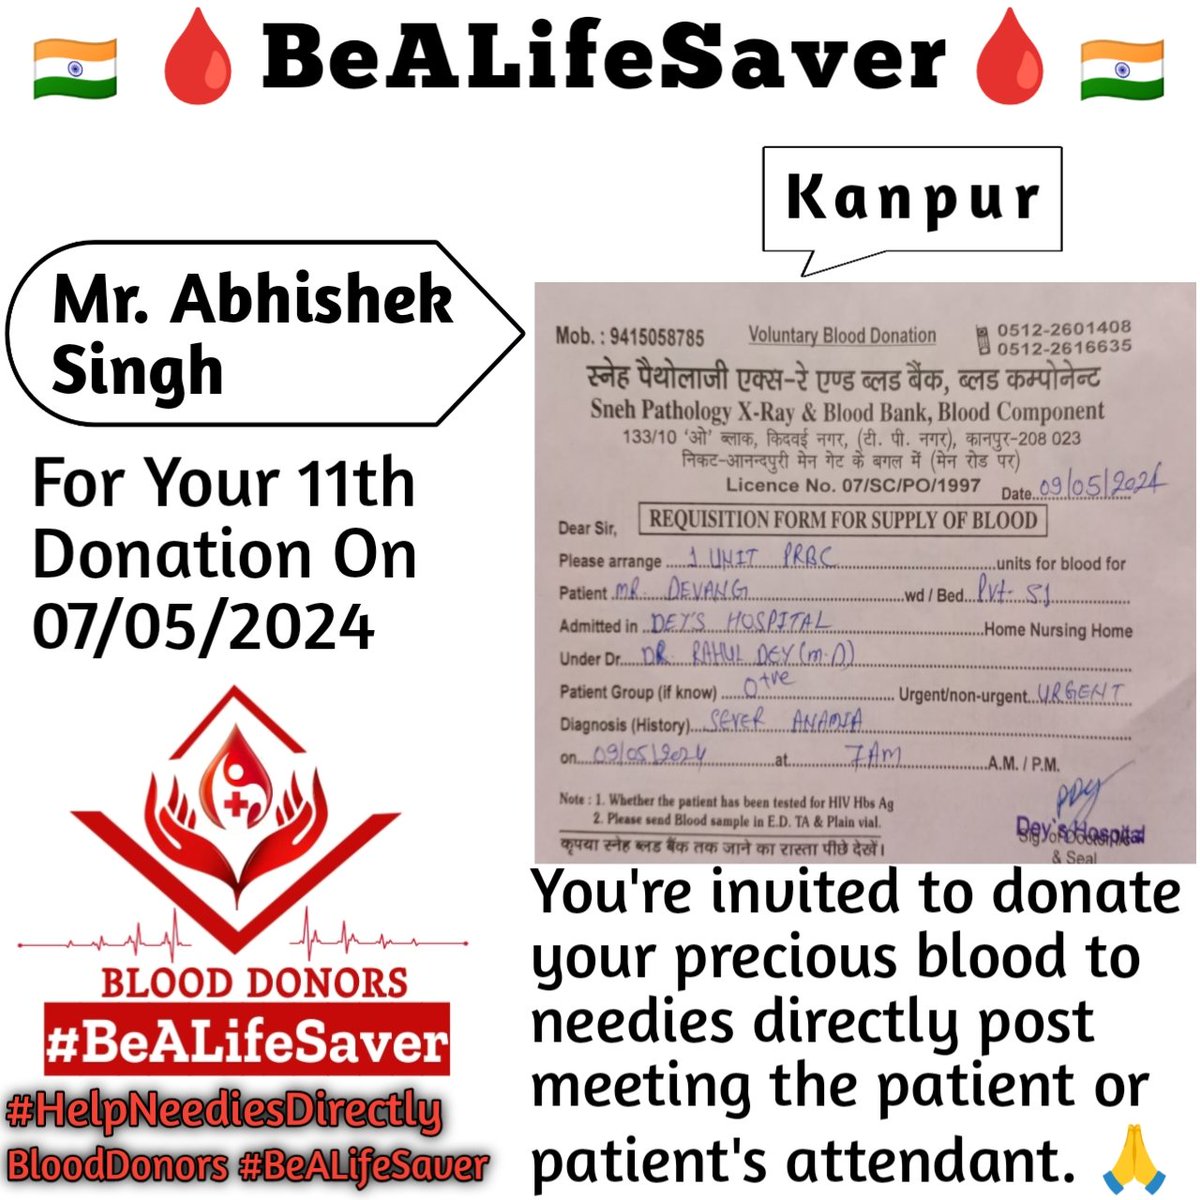 Kanpur BeALifeSaver
Kudos_Mr_Abhishek_Singh_Ji
#HelpNeediesDirectly

Today's hero
Mr. Abhishek_Singh Ji donated blood in Kanpur for the 11th Time for one of the needies. Heartfelt Gratitude and Respect to Abhishek Singh Ji for his blood donation for Patient admitted in Kanpur.